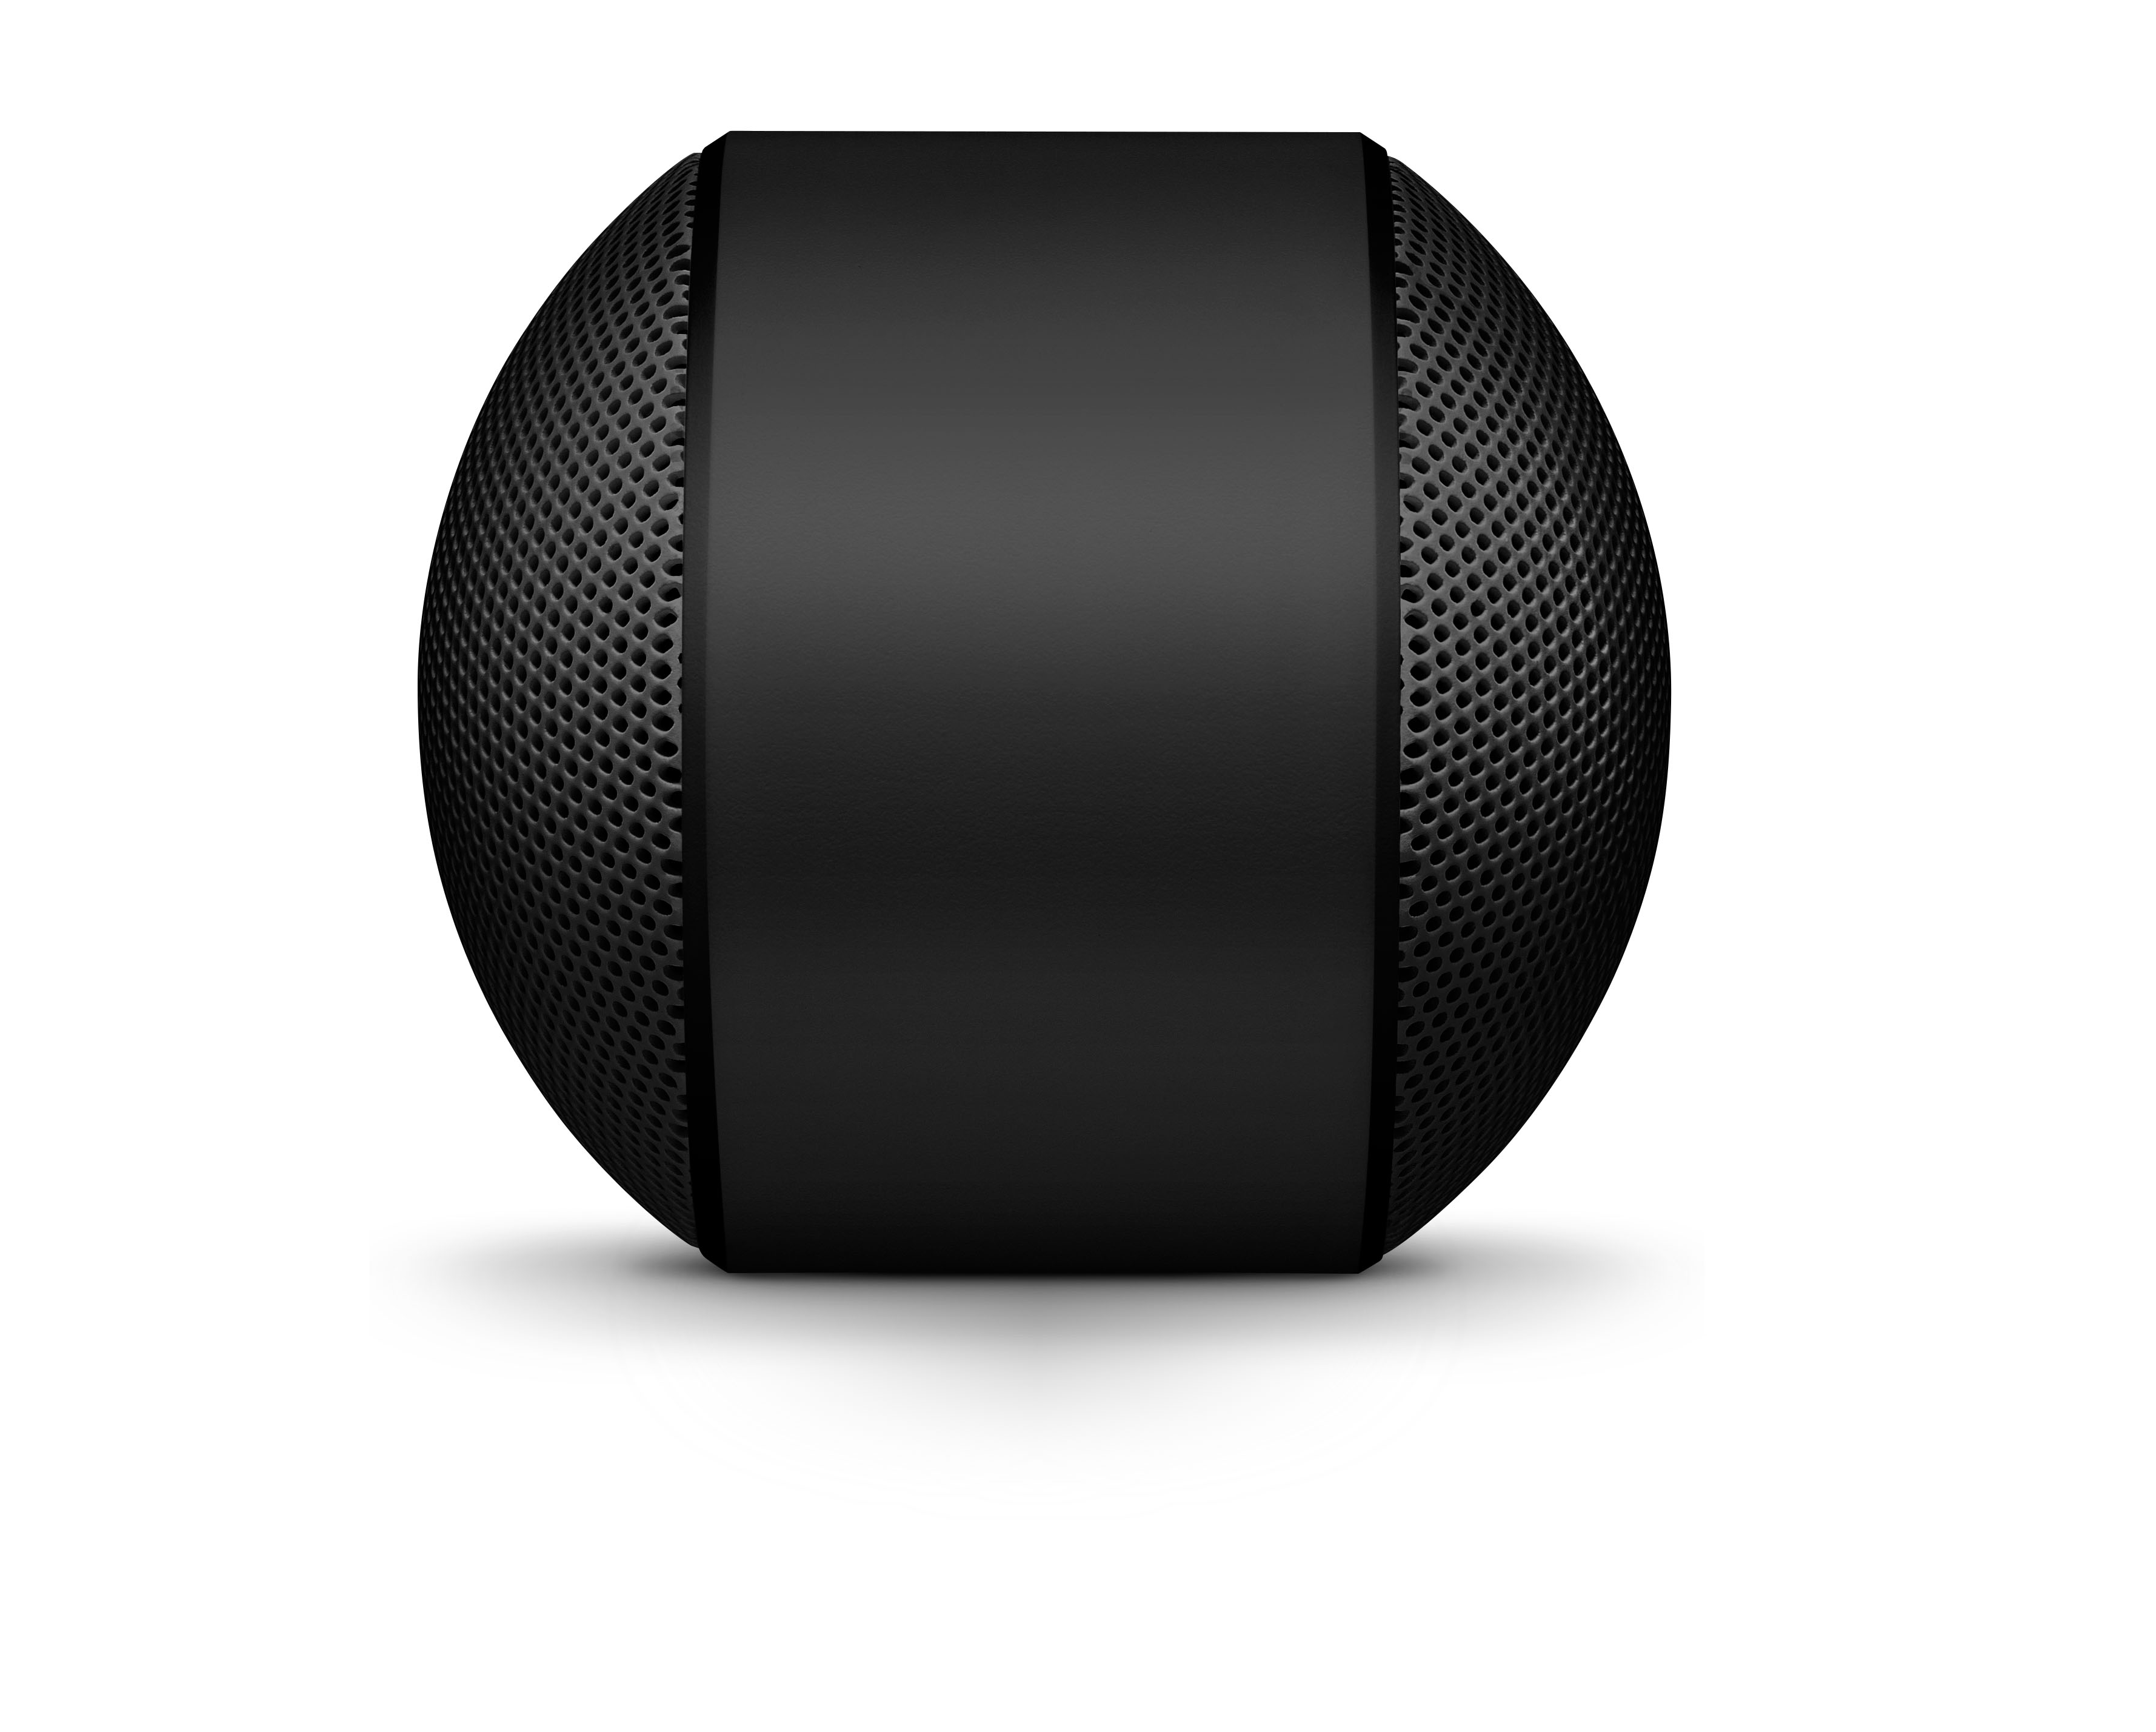 Beats by Dr. Dre Pill+ Portable Bluetooth Speaker, Black, ML4M2LL/A - image 7 of 10